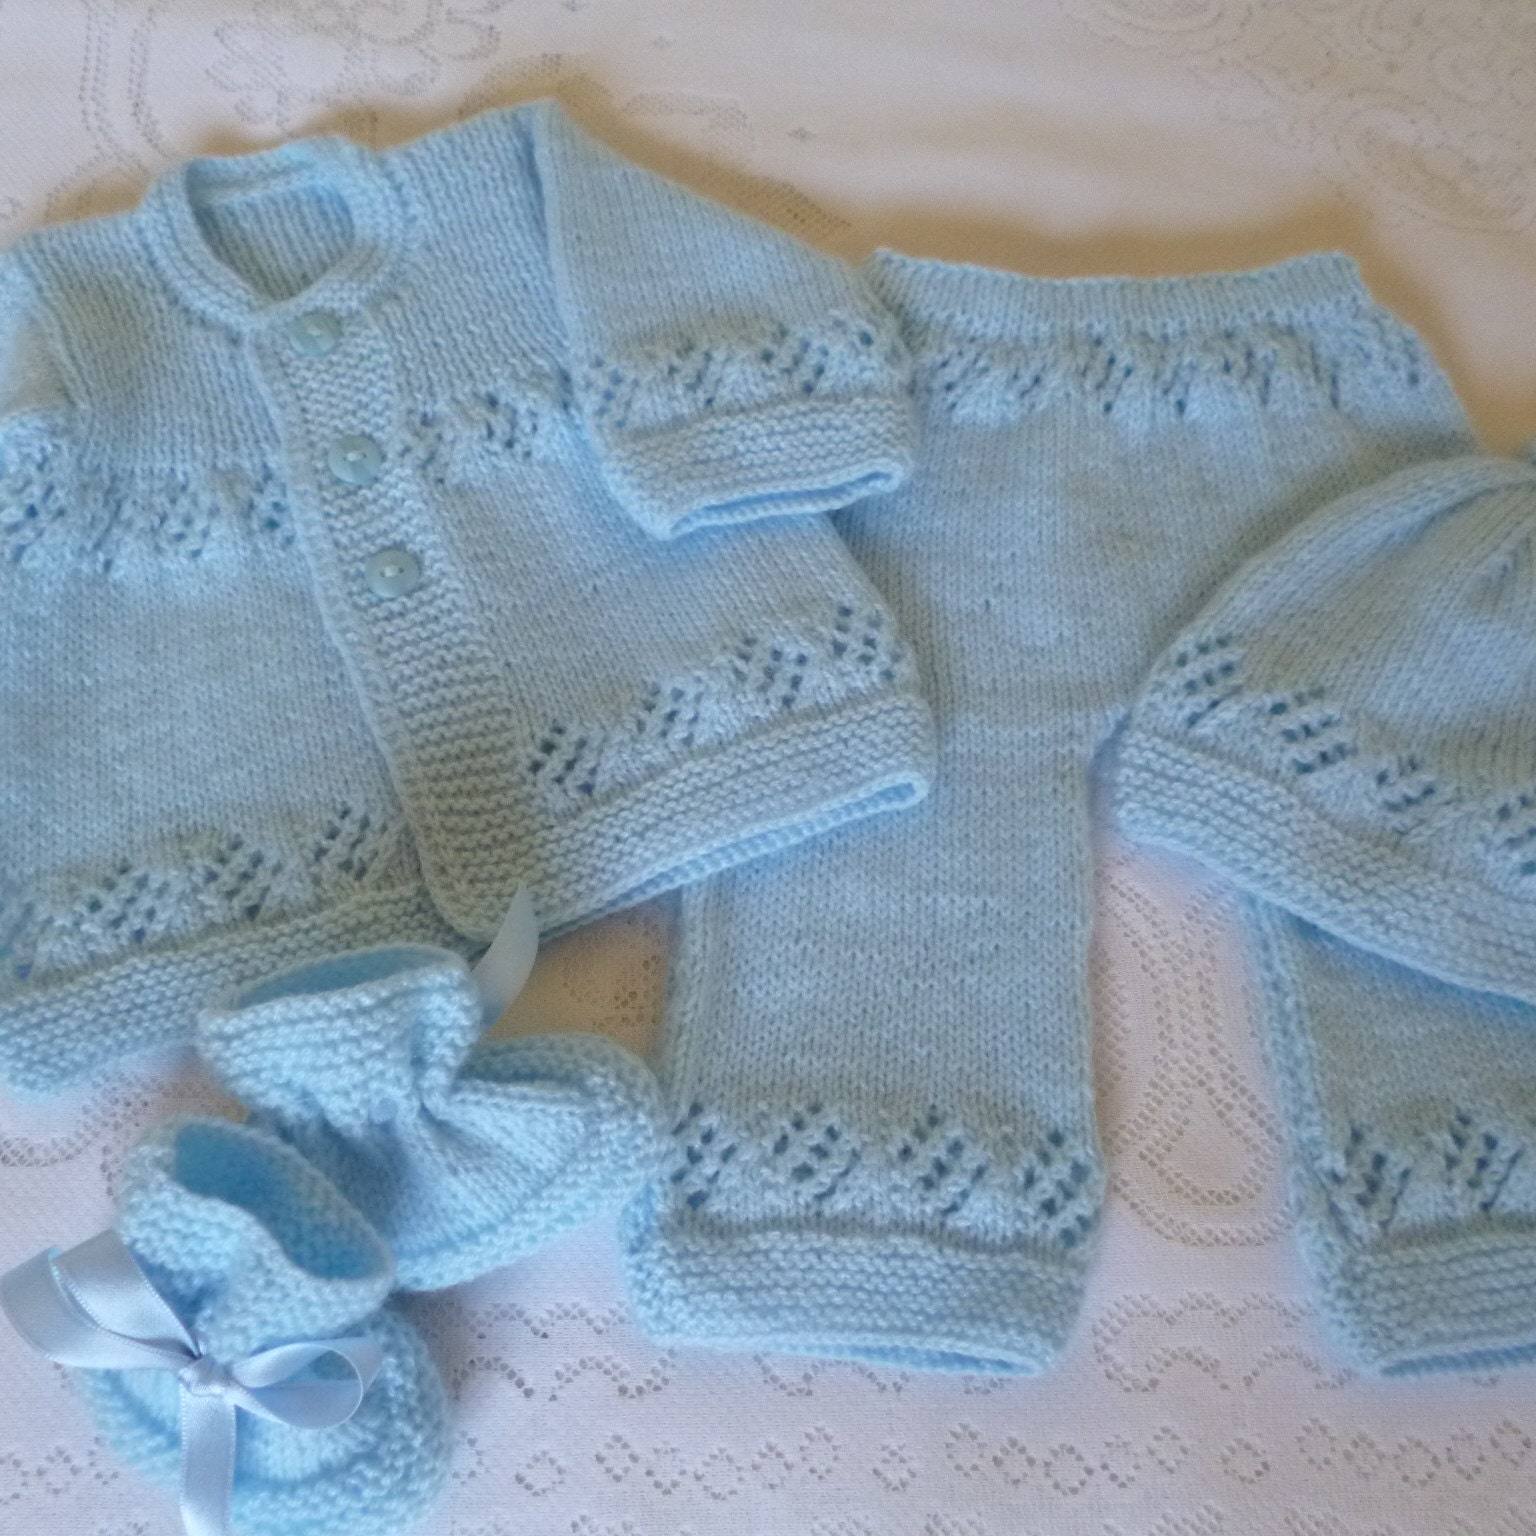 Baby clothes hand knitted with love by Pitusa on Etsy